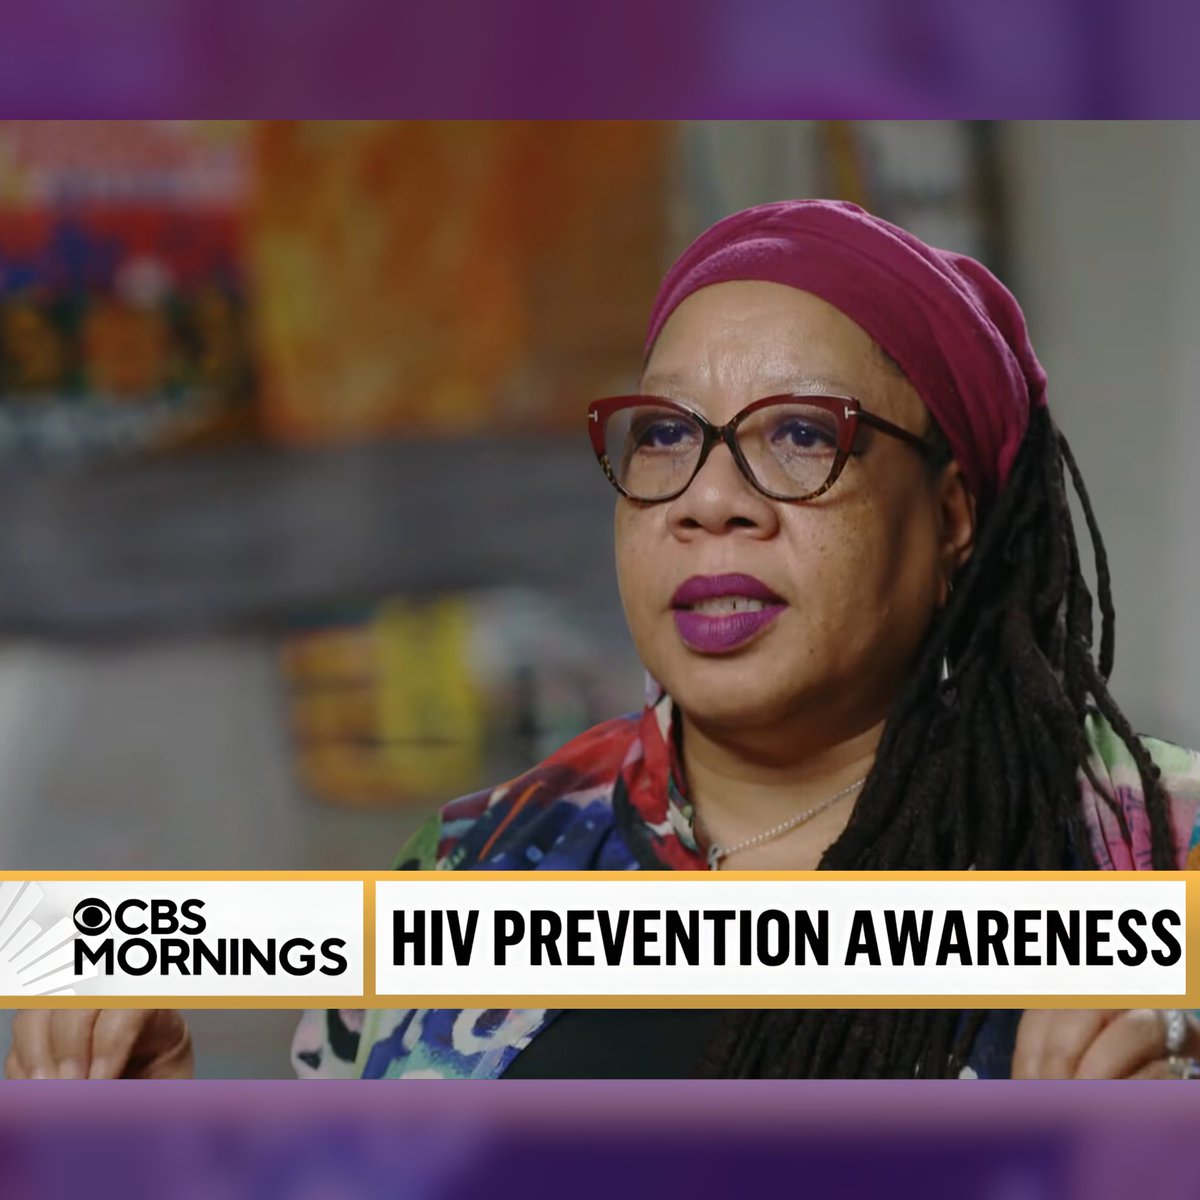 Thrilled to share our spot on @CBS Mornings talking about our fight to end the HIV epidemic 🌟. It's all about meeting people where they're at AND where they aim to be. 35 years in #Atlanta and #SouthAfrica have shown us: listening saves lives. 🌍💖